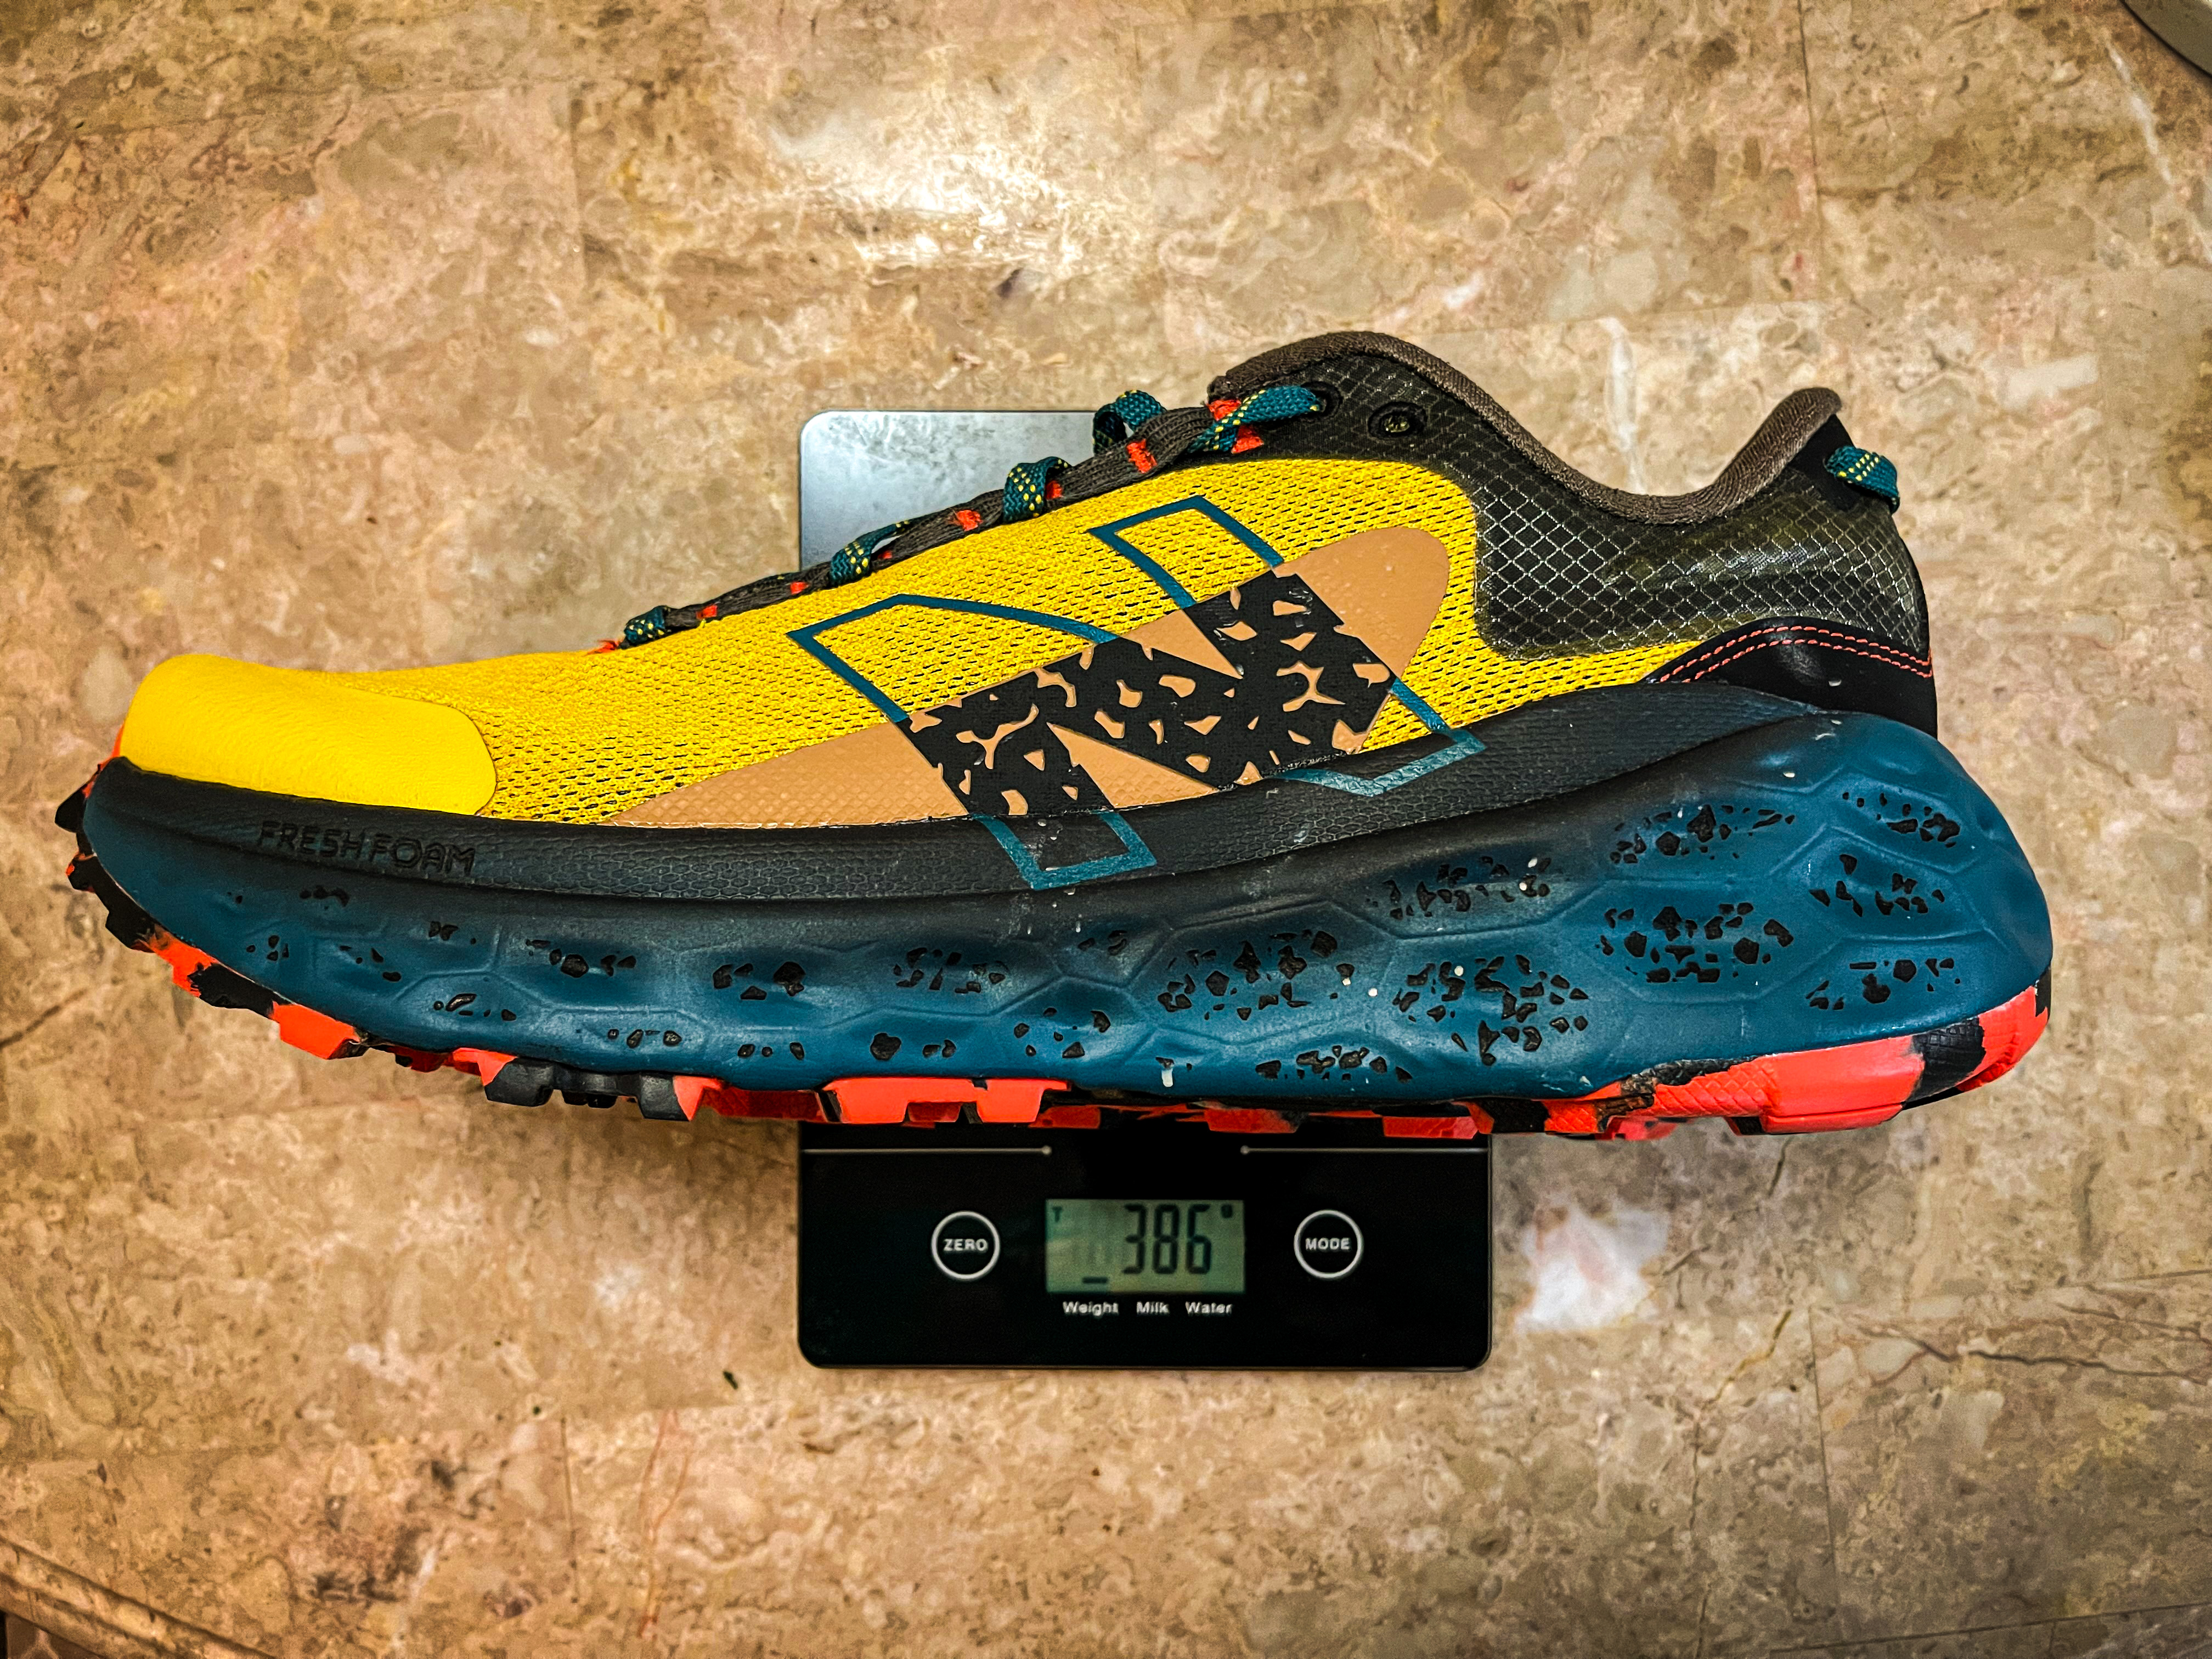 Road Run: New Balance Foam More Trail v2 Multi Tester Review: Soft, Max Cushion, Friendly. Now More Technical Trails Ready!